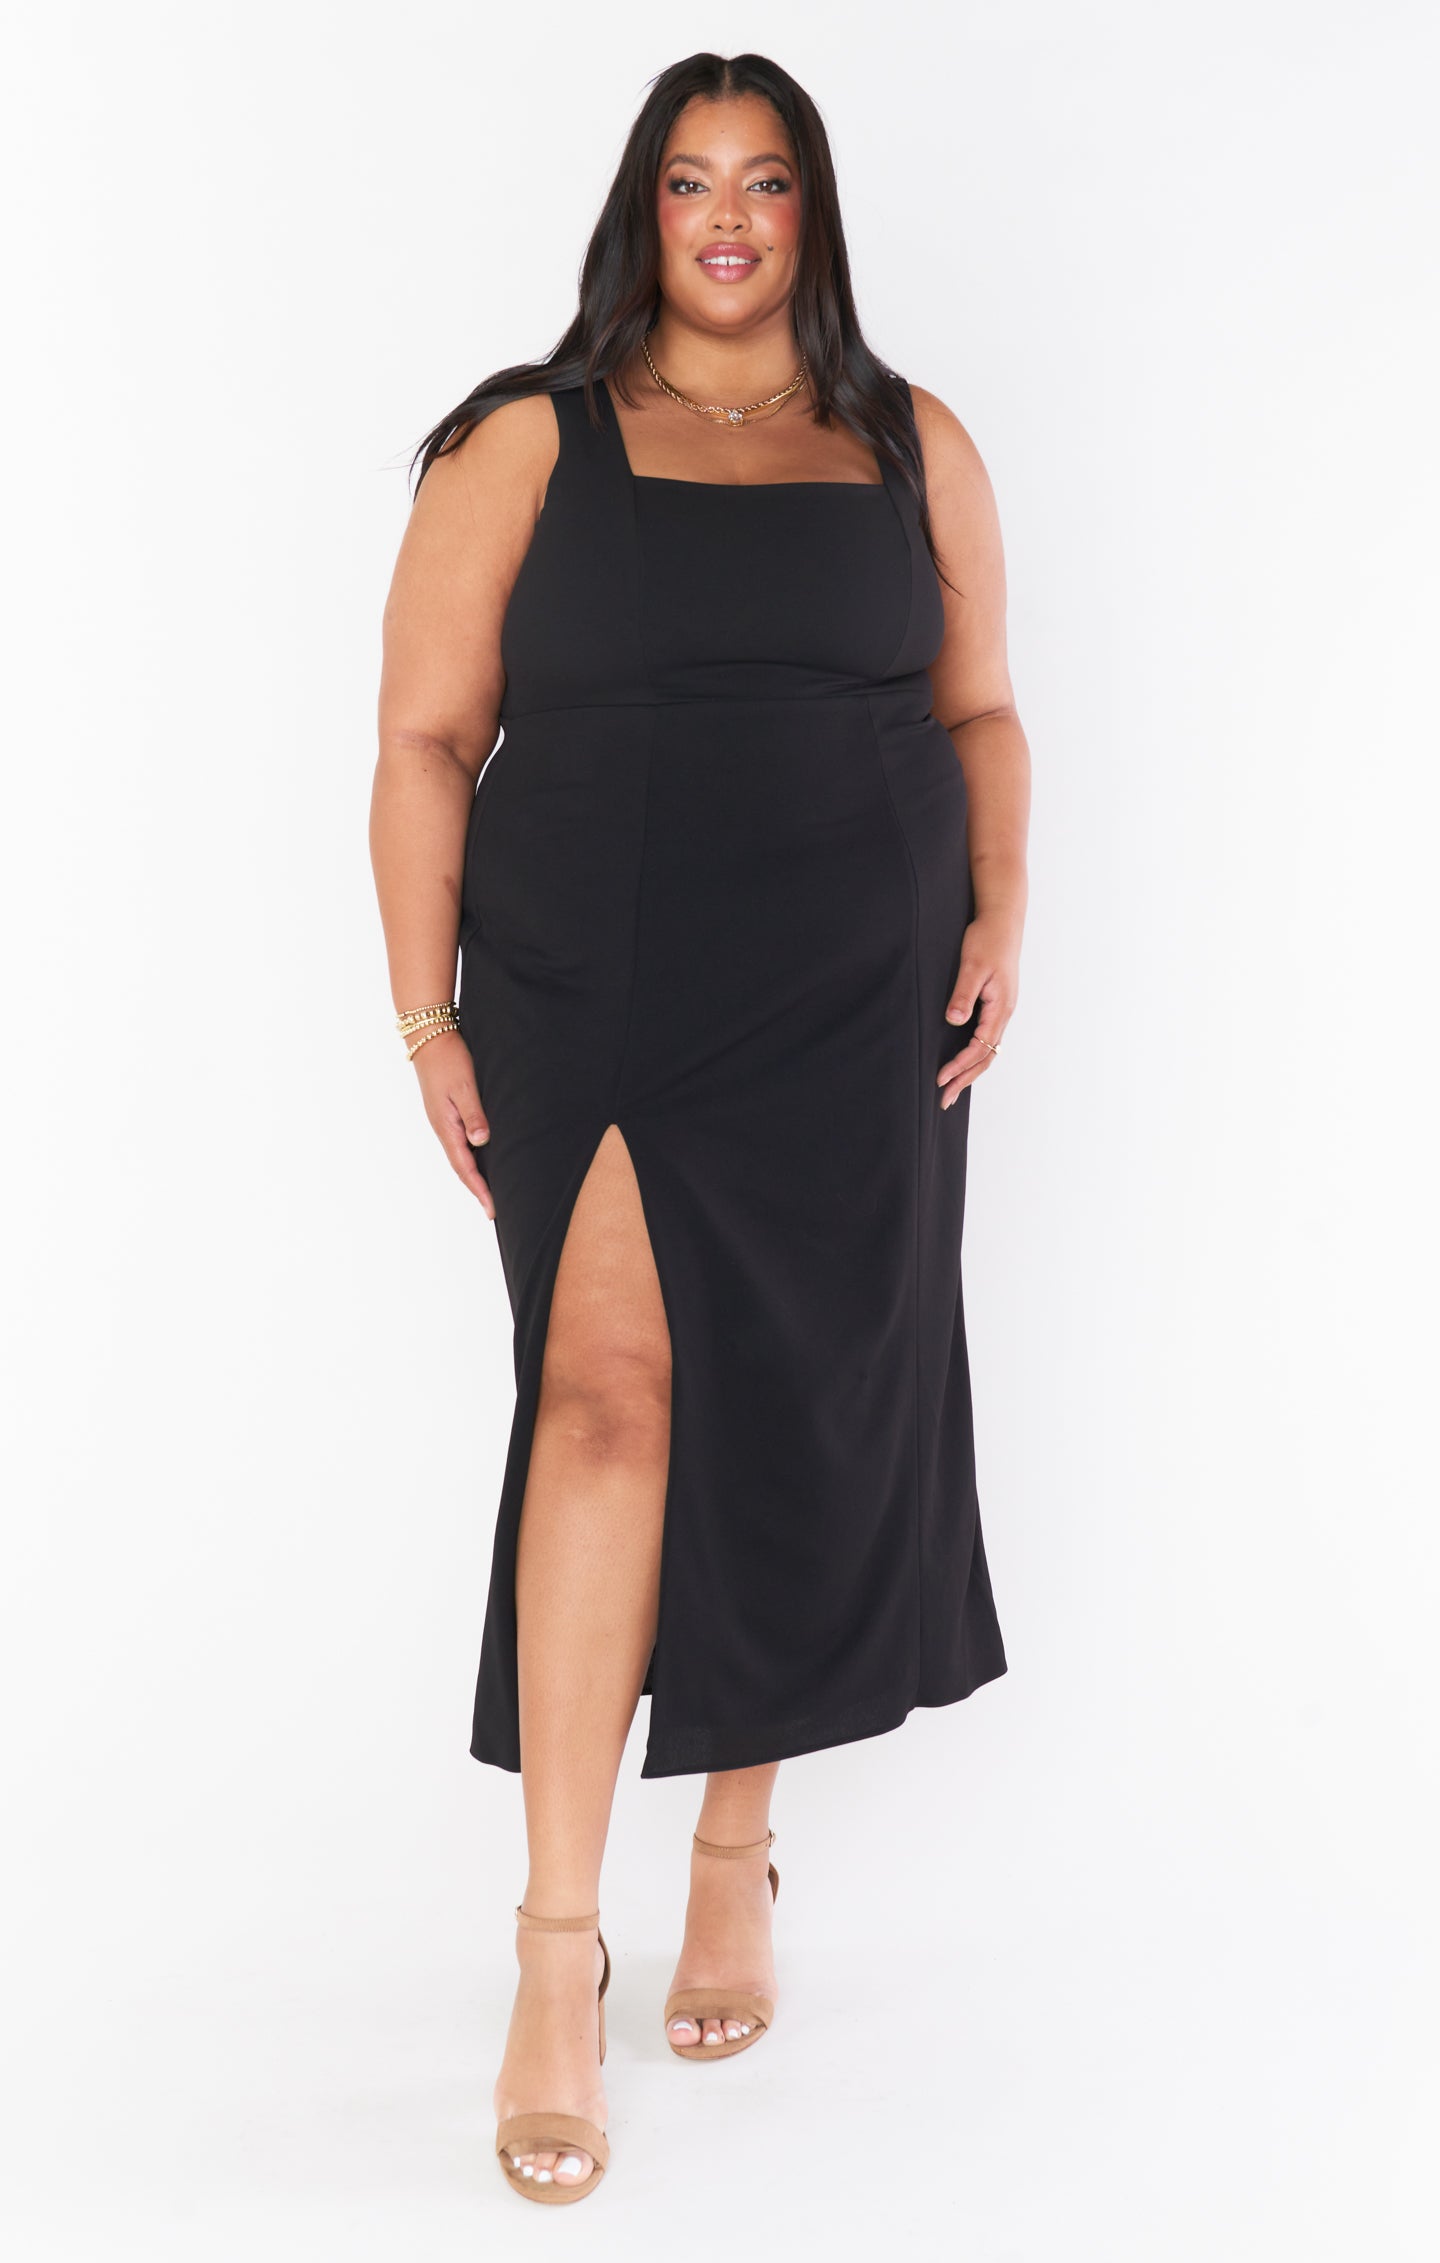 Non-Slip Tube Dress, Fitted Strapless Dress, in Sizes S-XXL Also in Colors  Nude and Black. (Sold Individually)